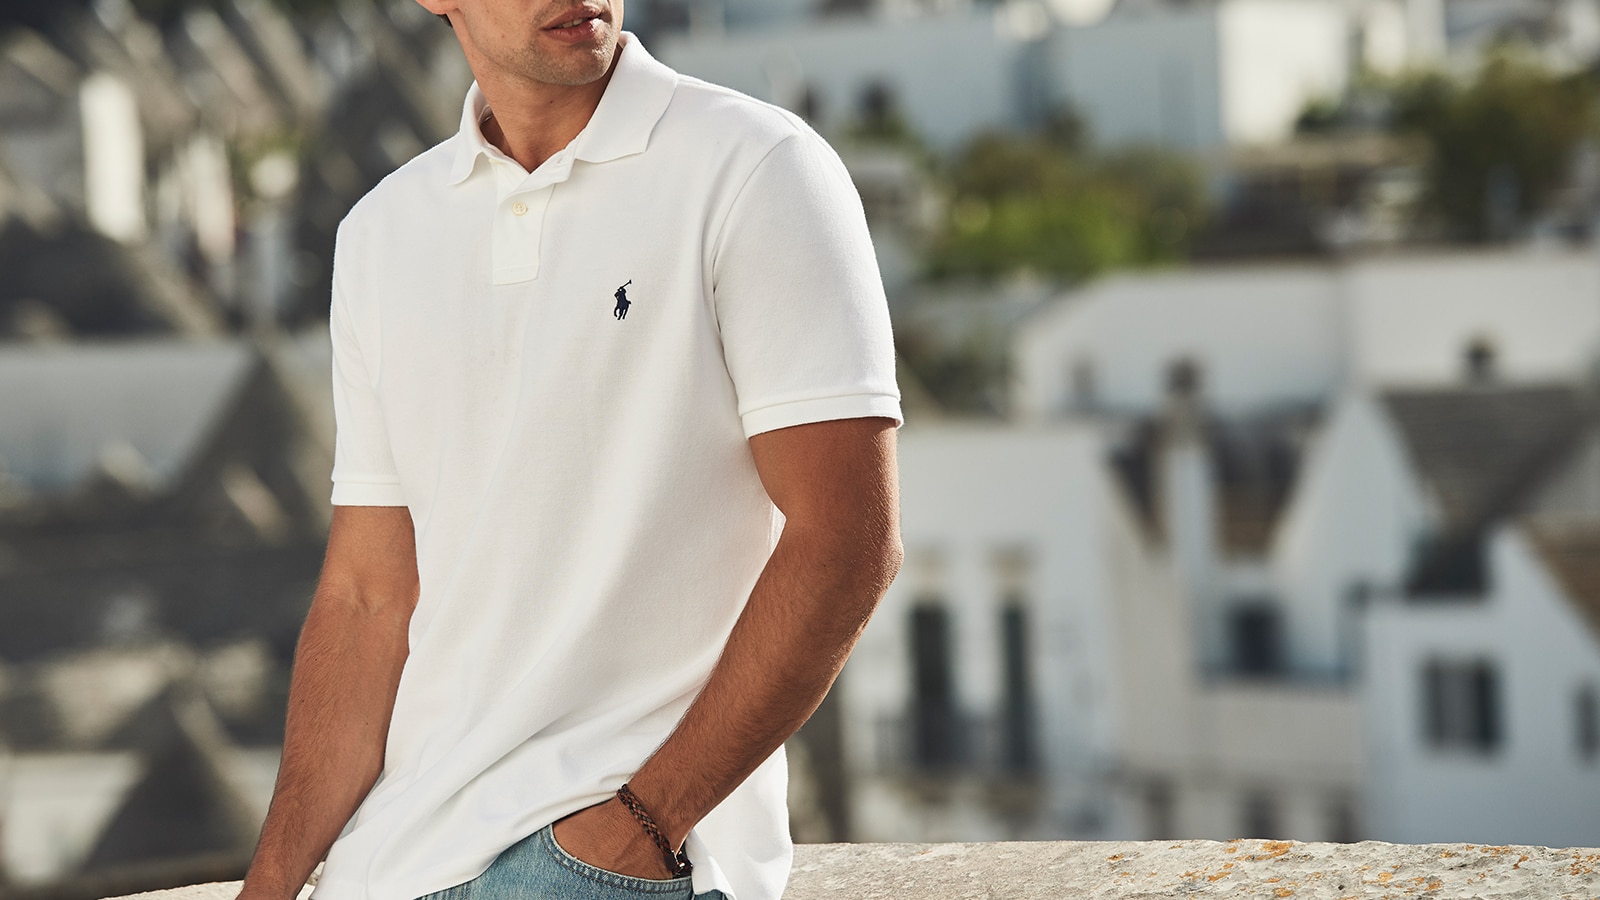 How To Wear A Polo Shirt: Relaxing In The Town | The Journal | MR PORTER